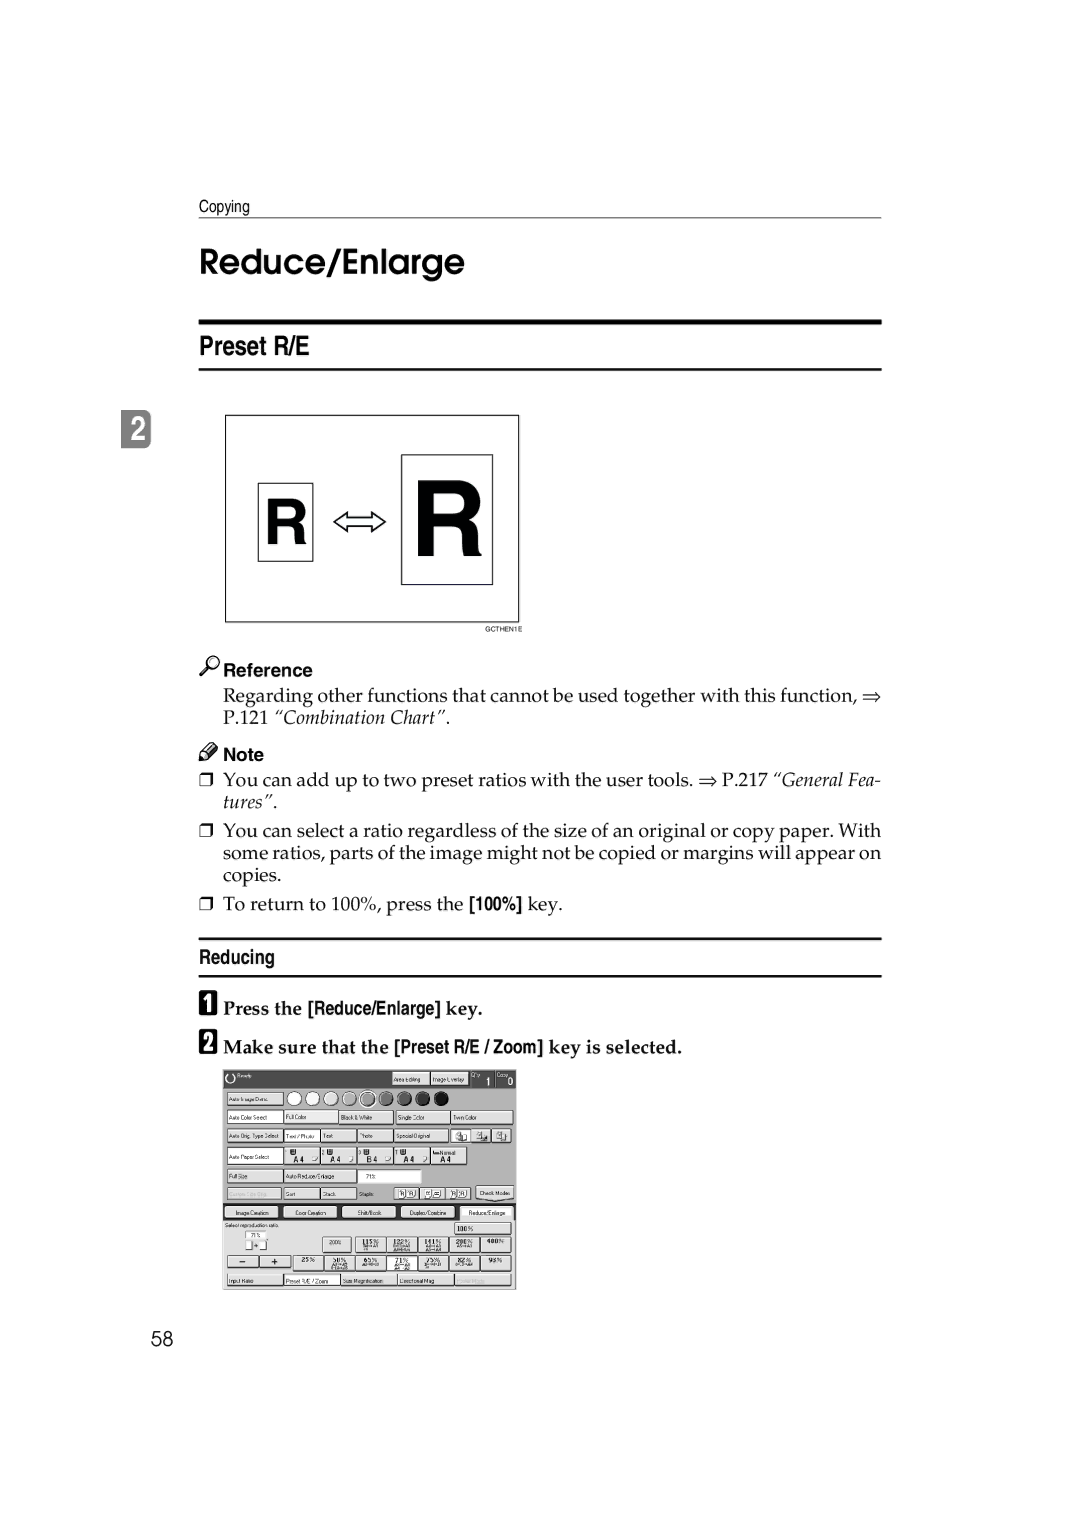 Ricoh 6513 manual Reducing, Press the Reduce/Enlarge key, Make sure that the Preset R/E / Zoom key is selected 